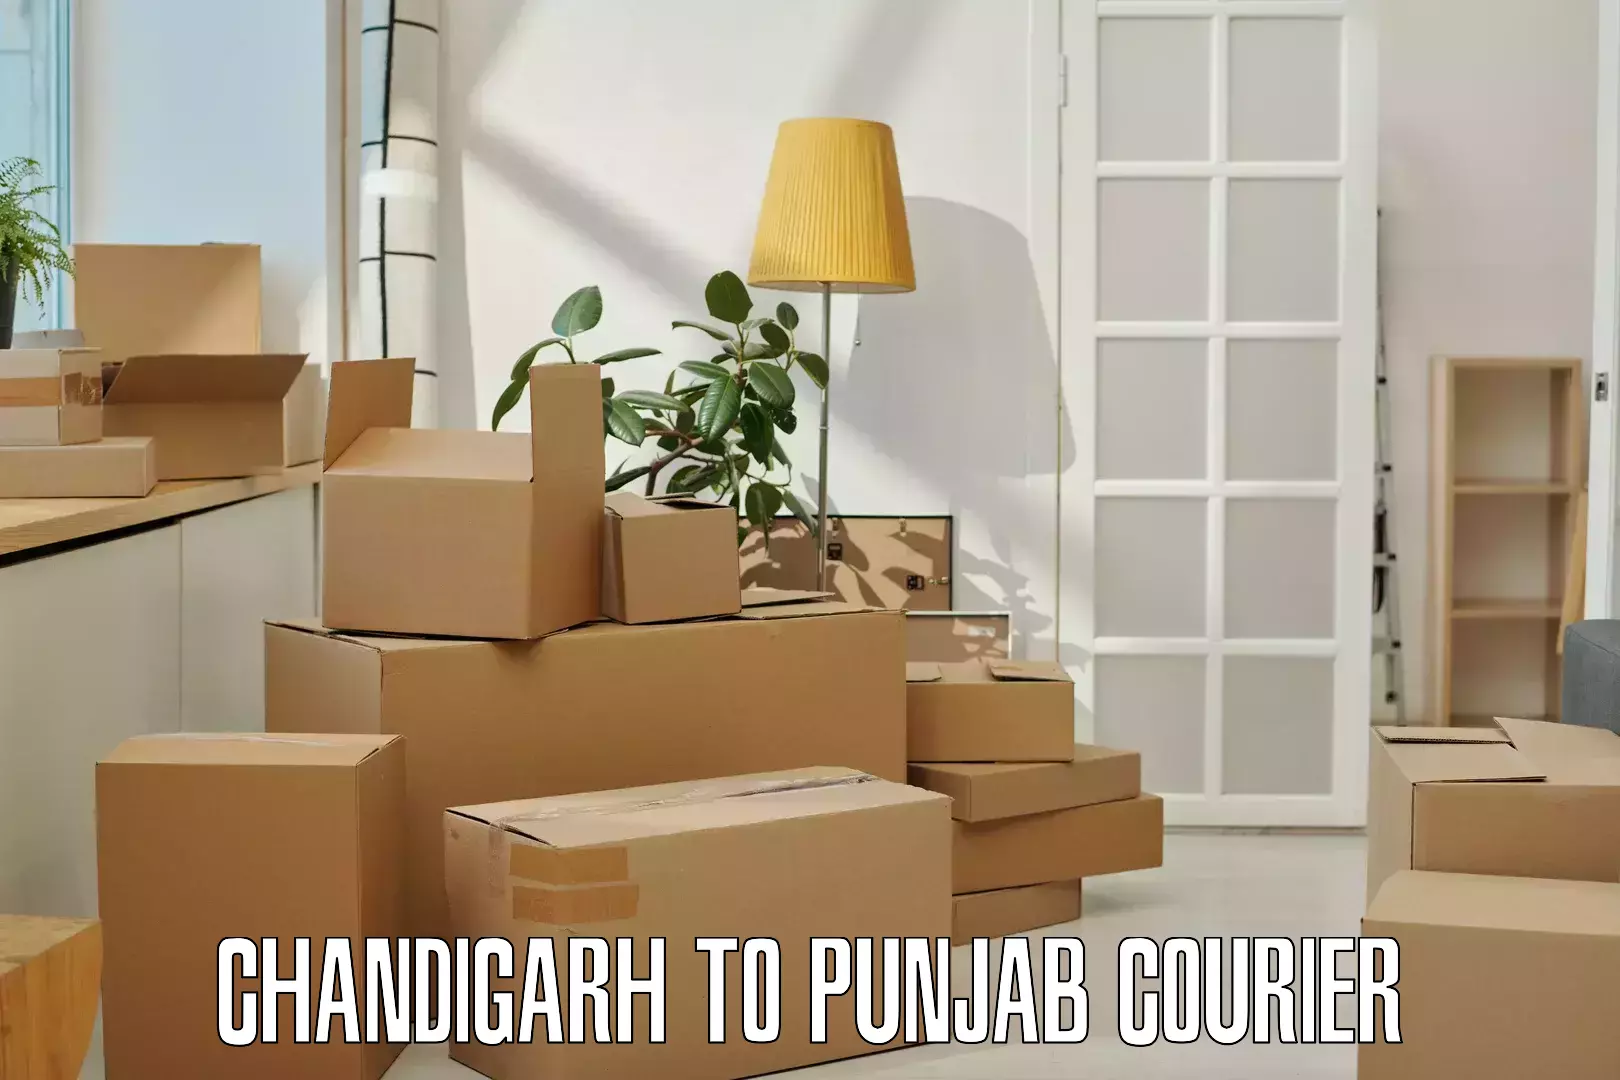 Subscription-based courier Chandigarh to Punjab